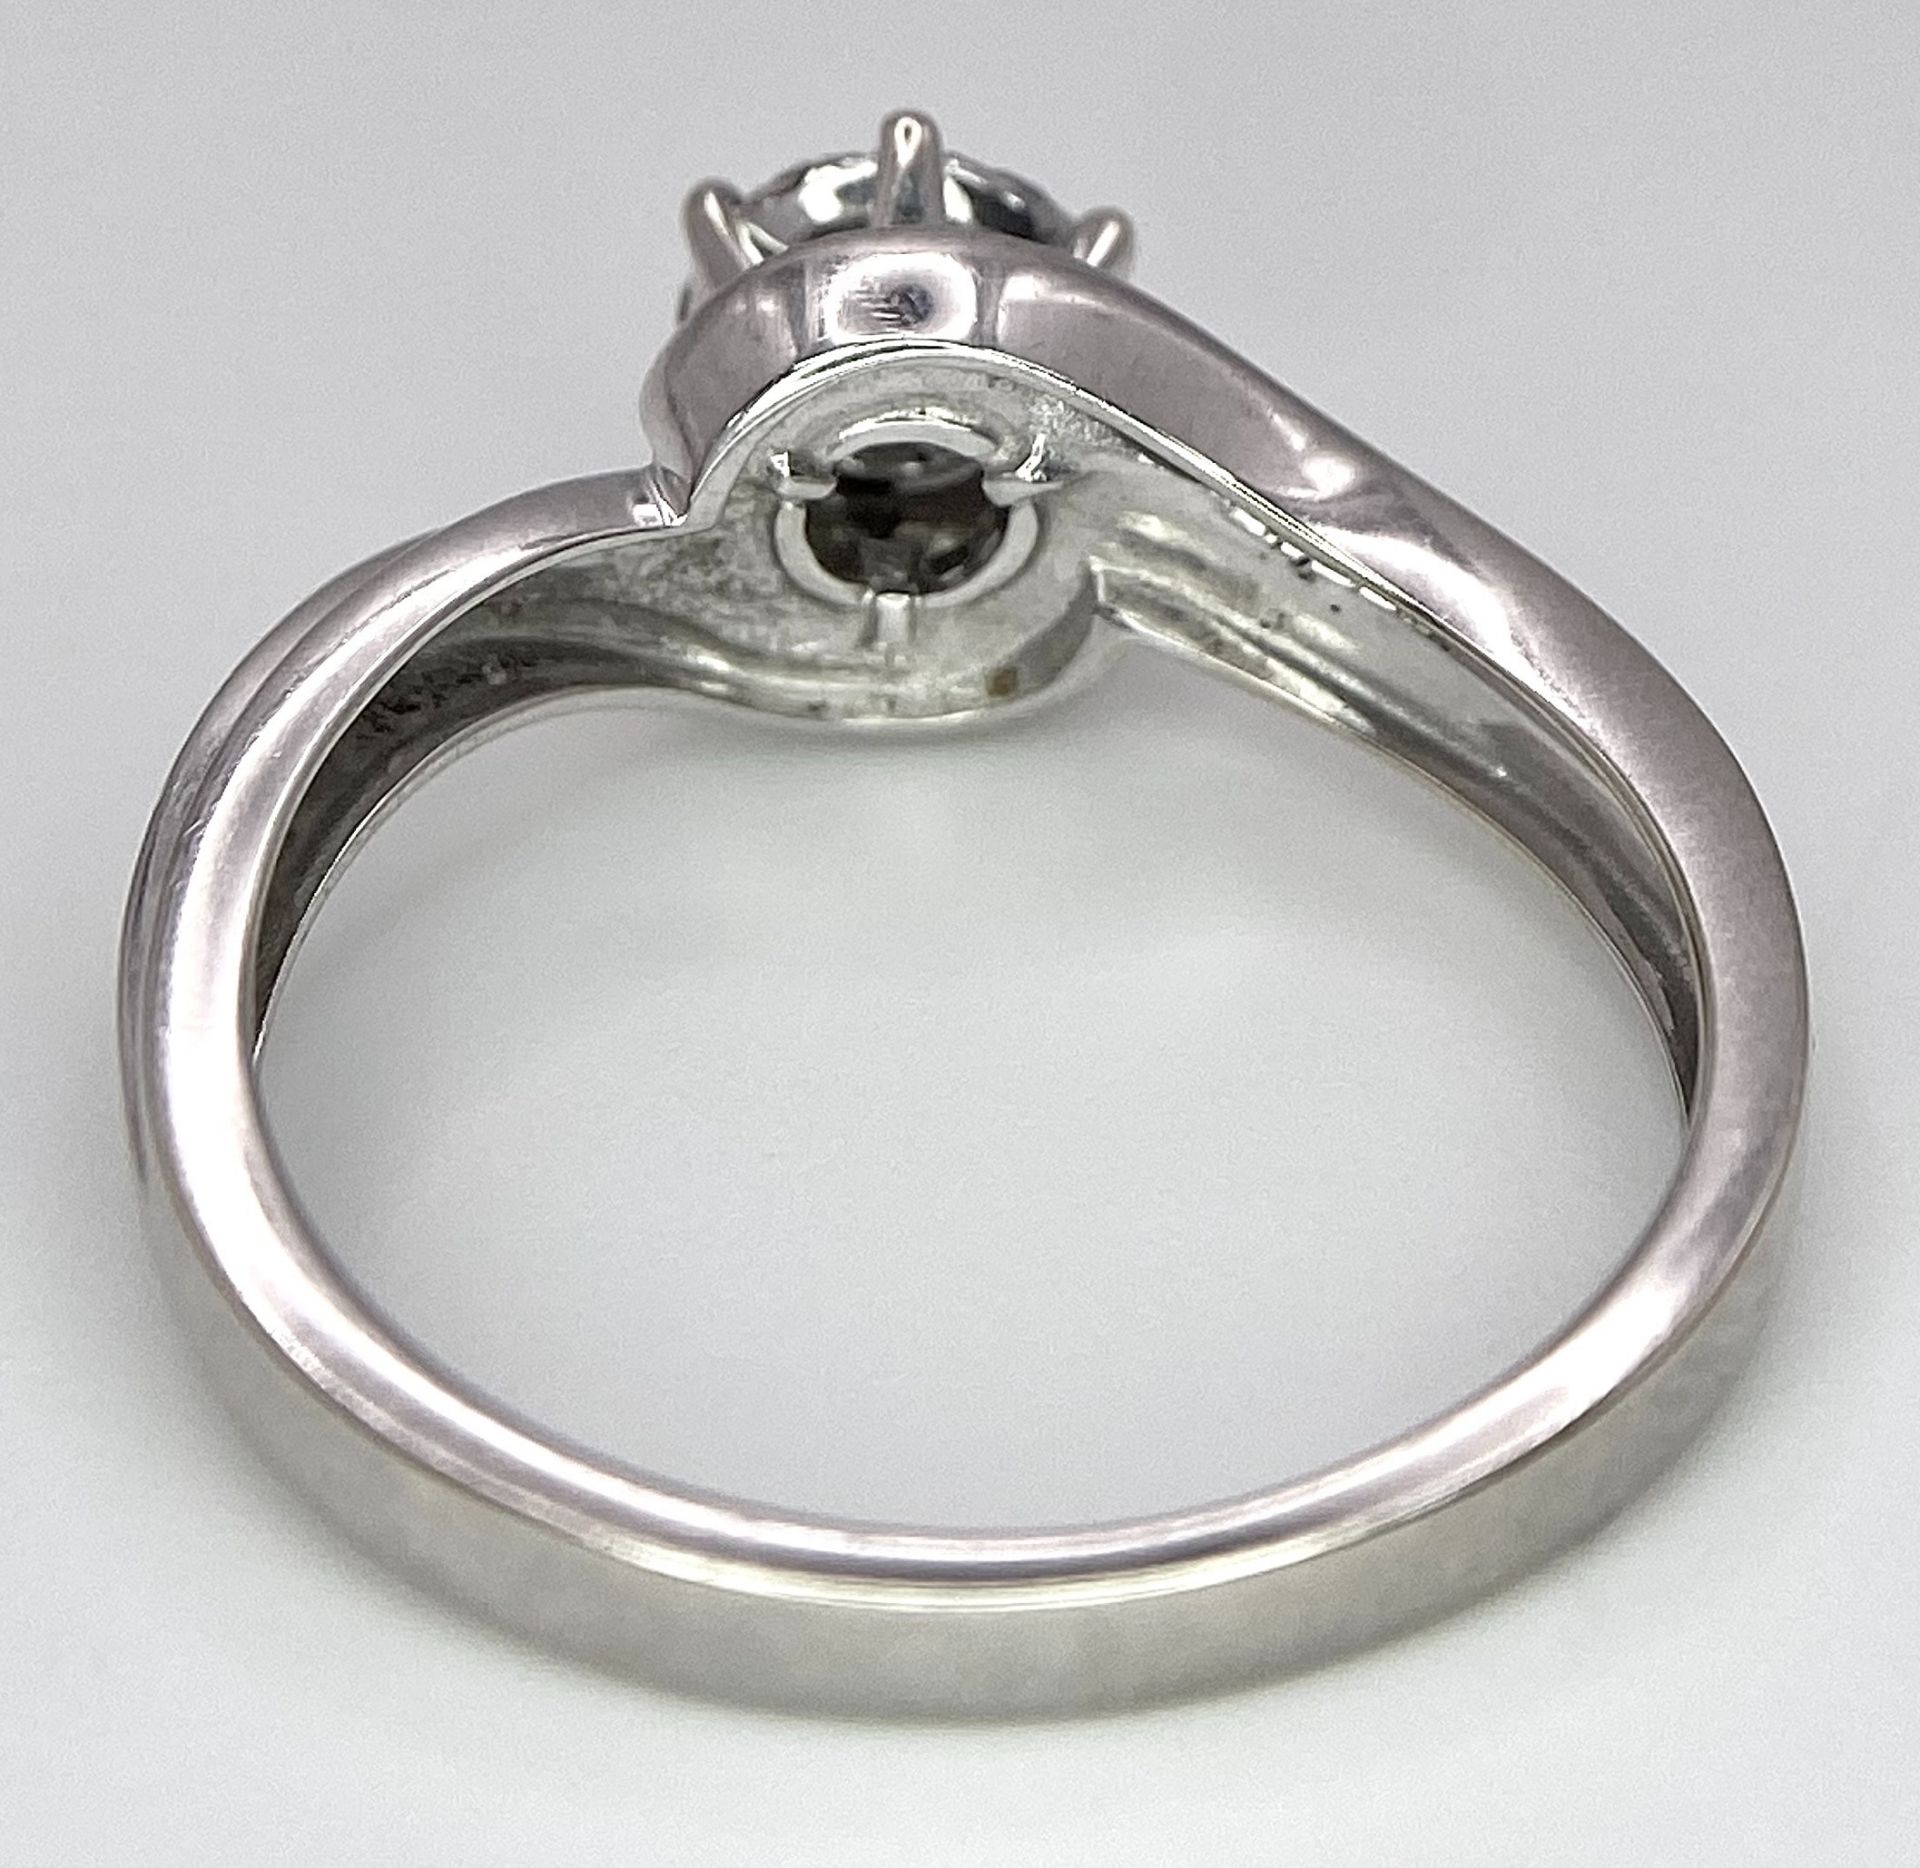 A 9K WHITE GOLD DIAMOND RING. 0.25ctw, Size L, 2.3g total weight. Ref: 8034 - Image 4 of 6